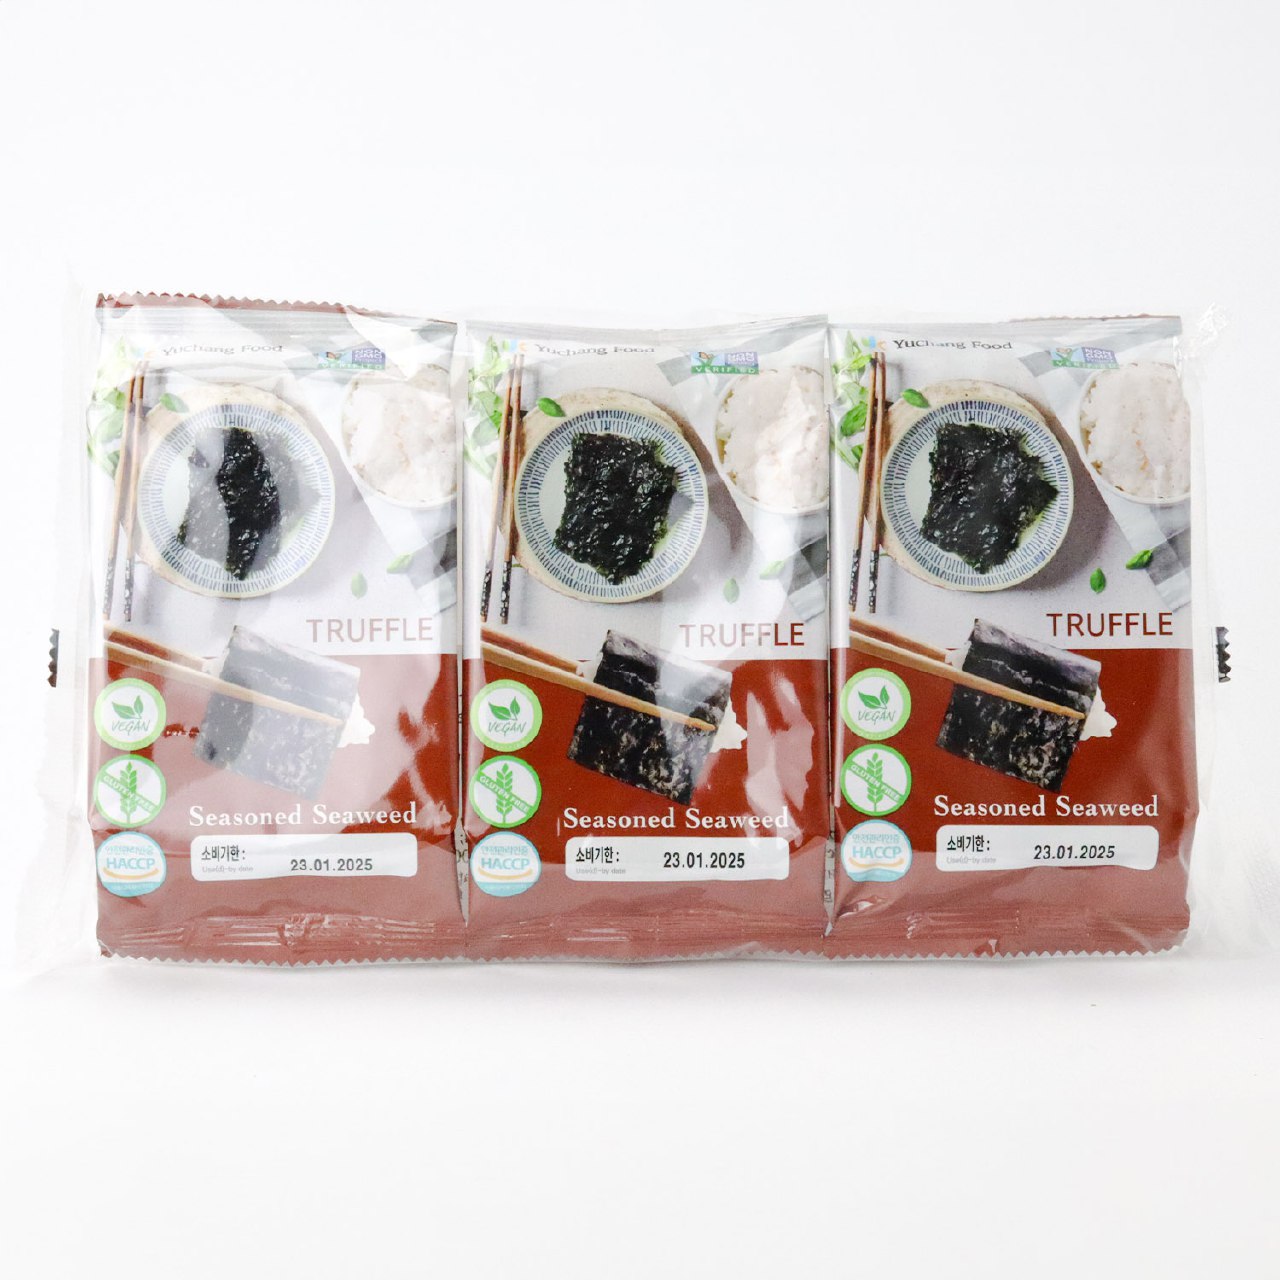 Seaweed snack with truffle 1 pcs